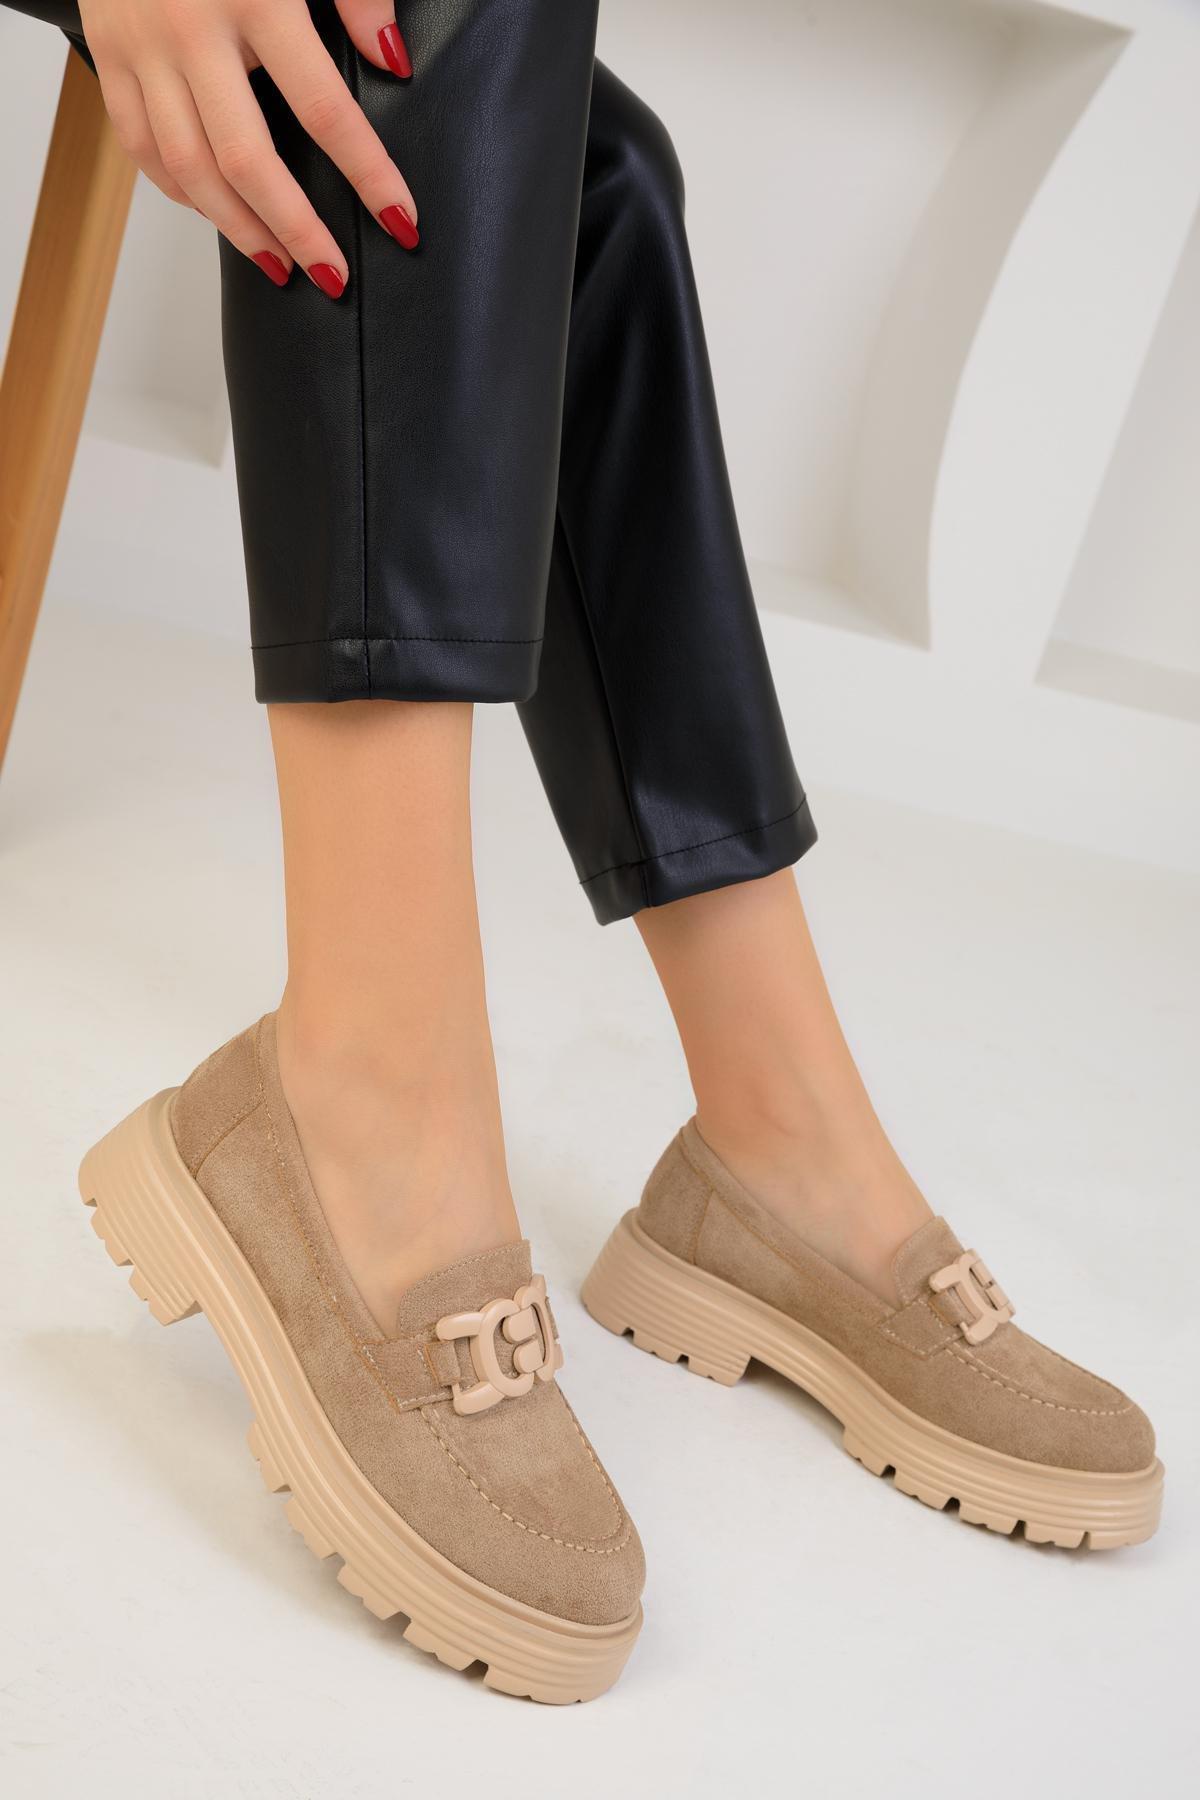 SOHO - Beige Suede Casual Shoes